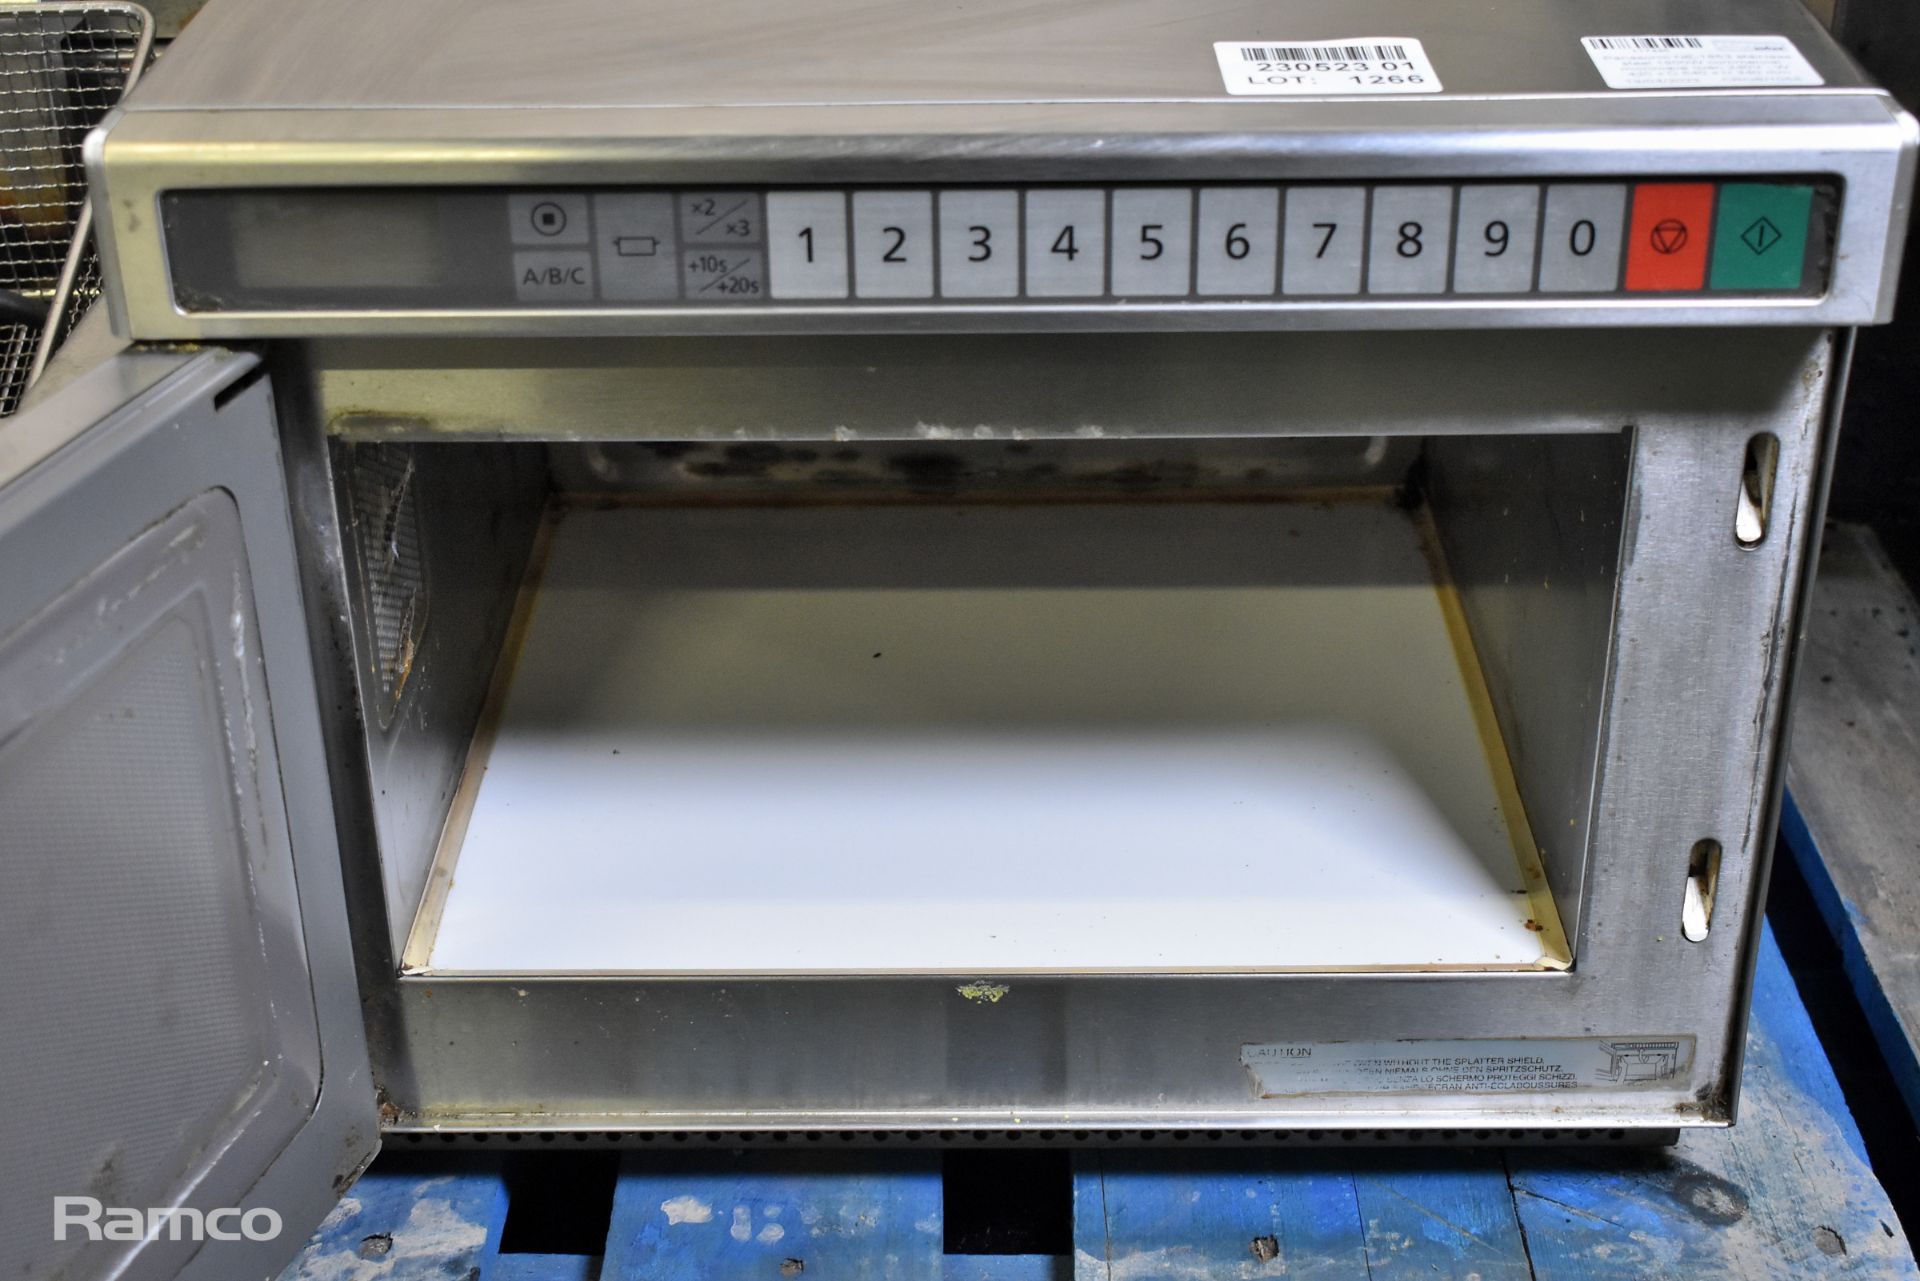 Panasonic NE-1853 stainless steel 1800W commercial microwave oven 240V - W 420 x D 540 x H 340 mm - Image 2 of 2